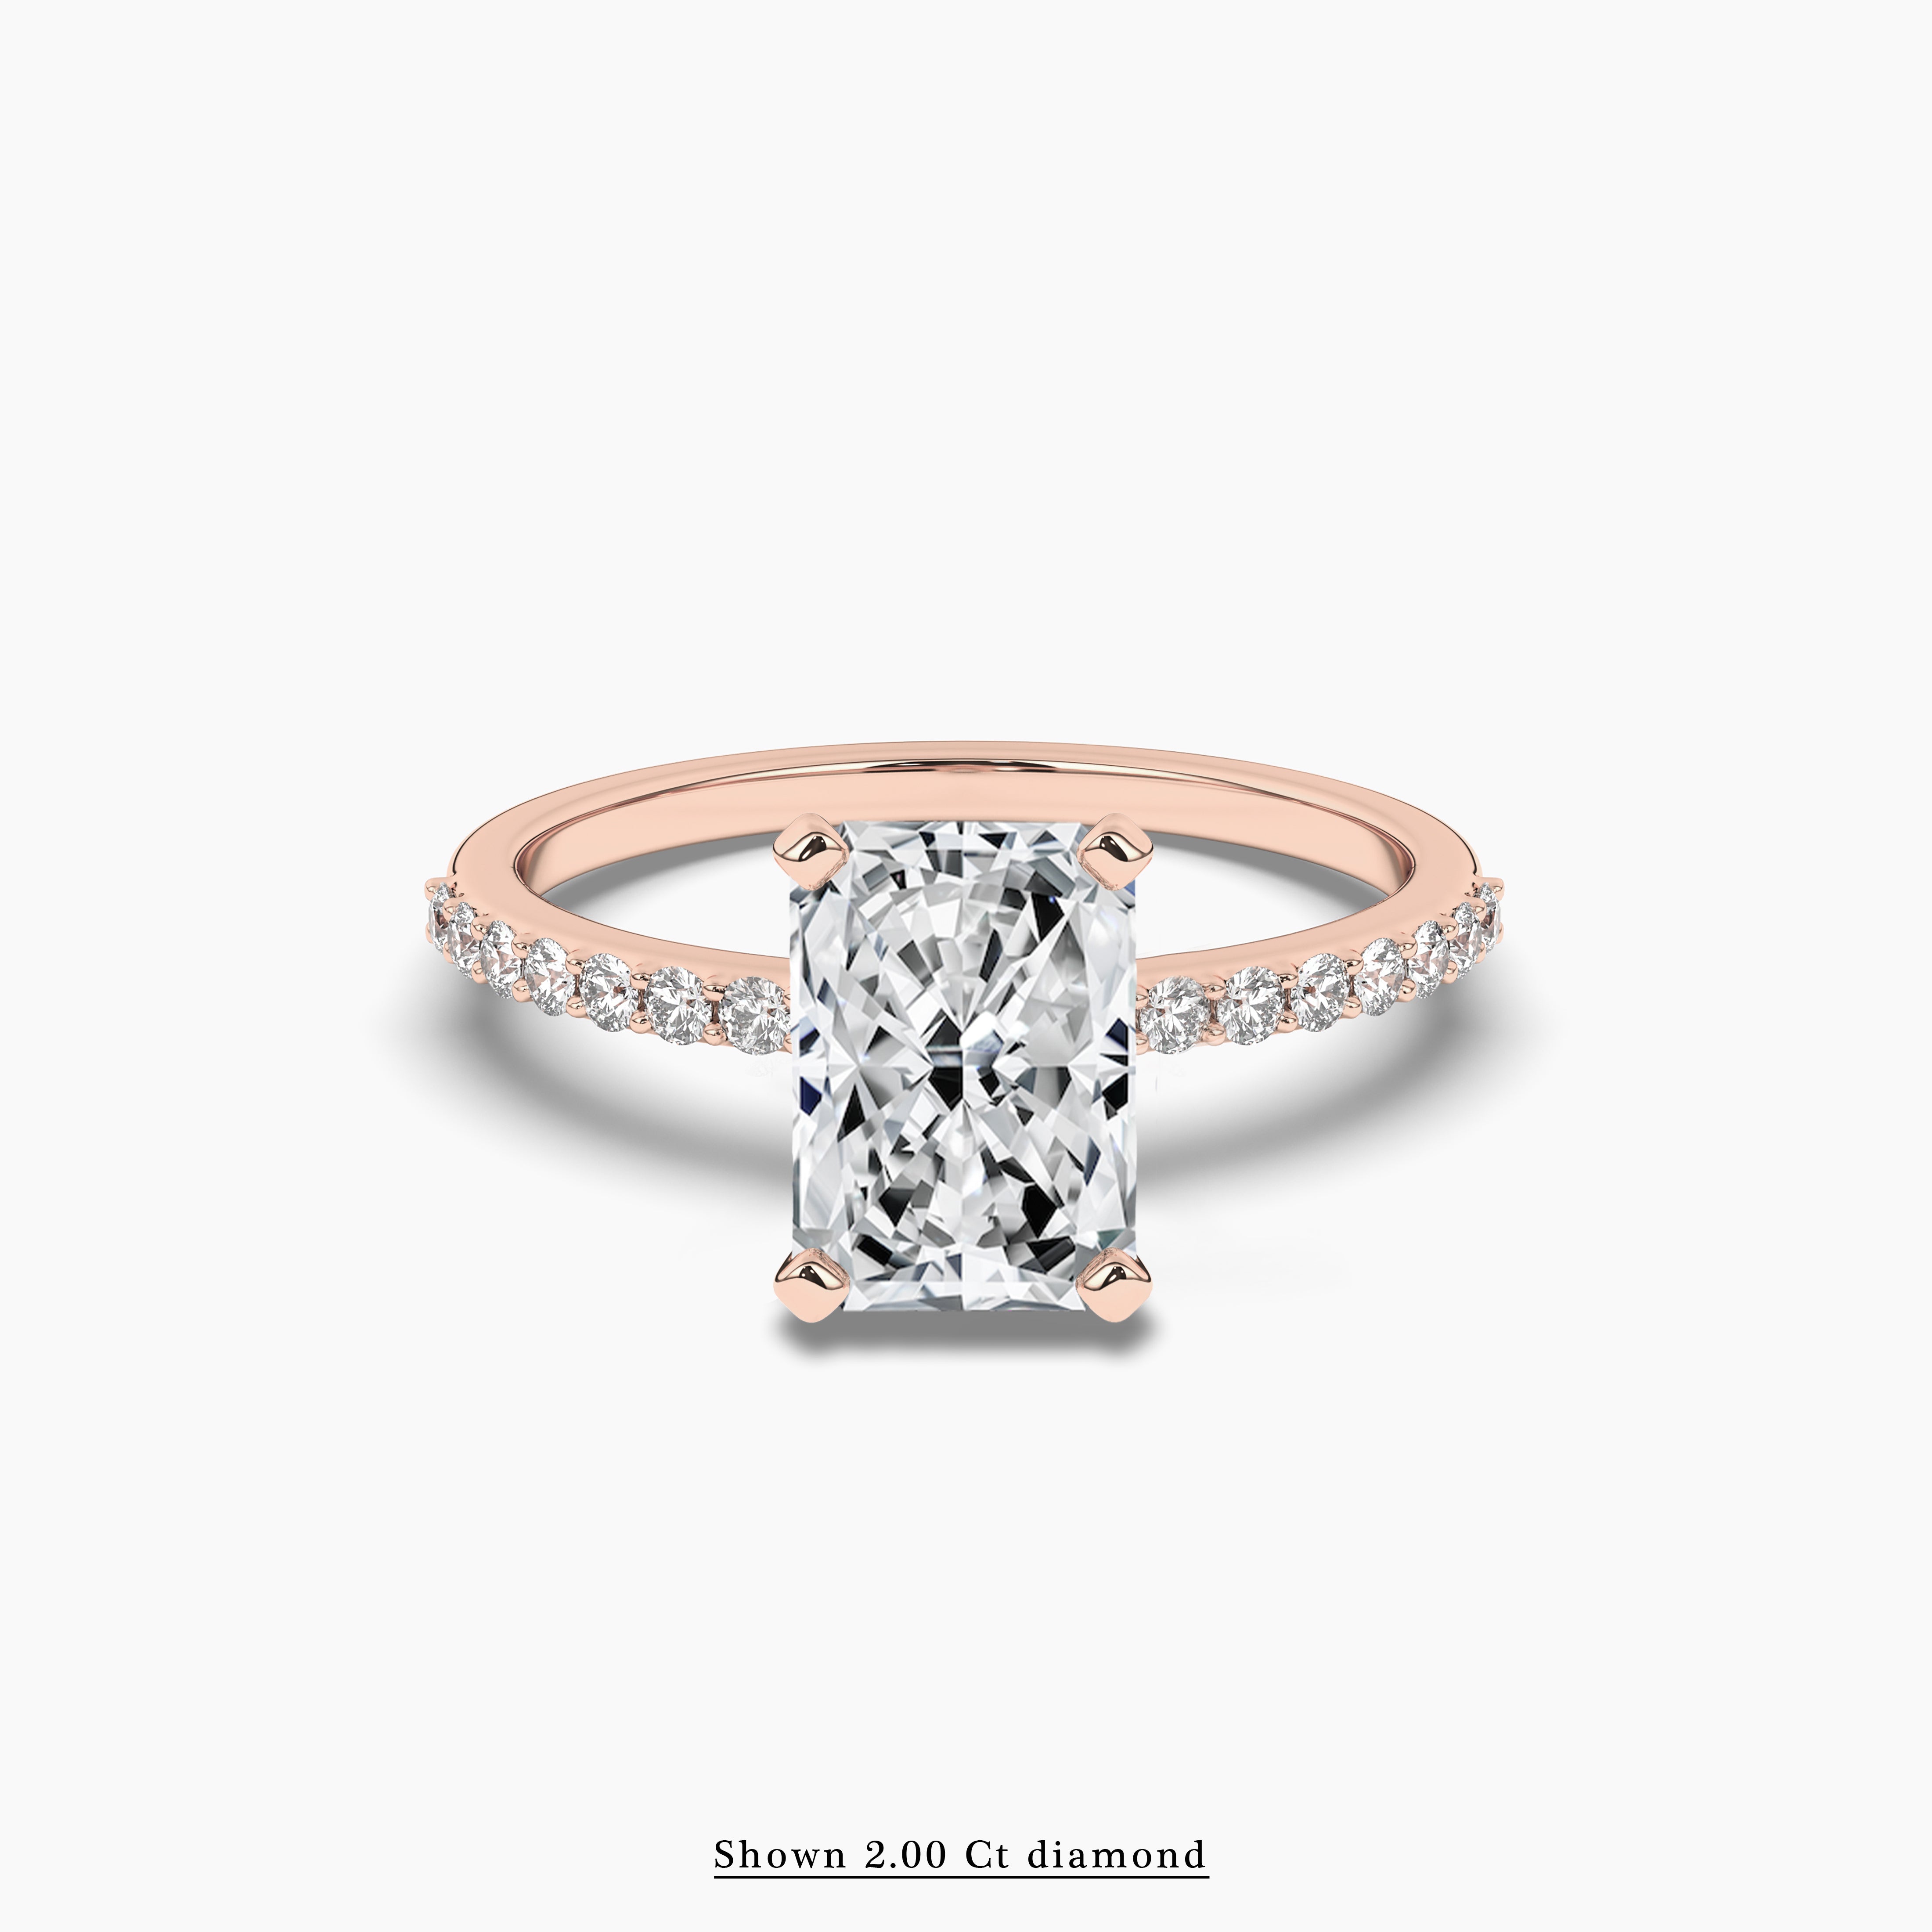 Radiant Cut Diamond Engagement Ring With Round Shape Side Stones